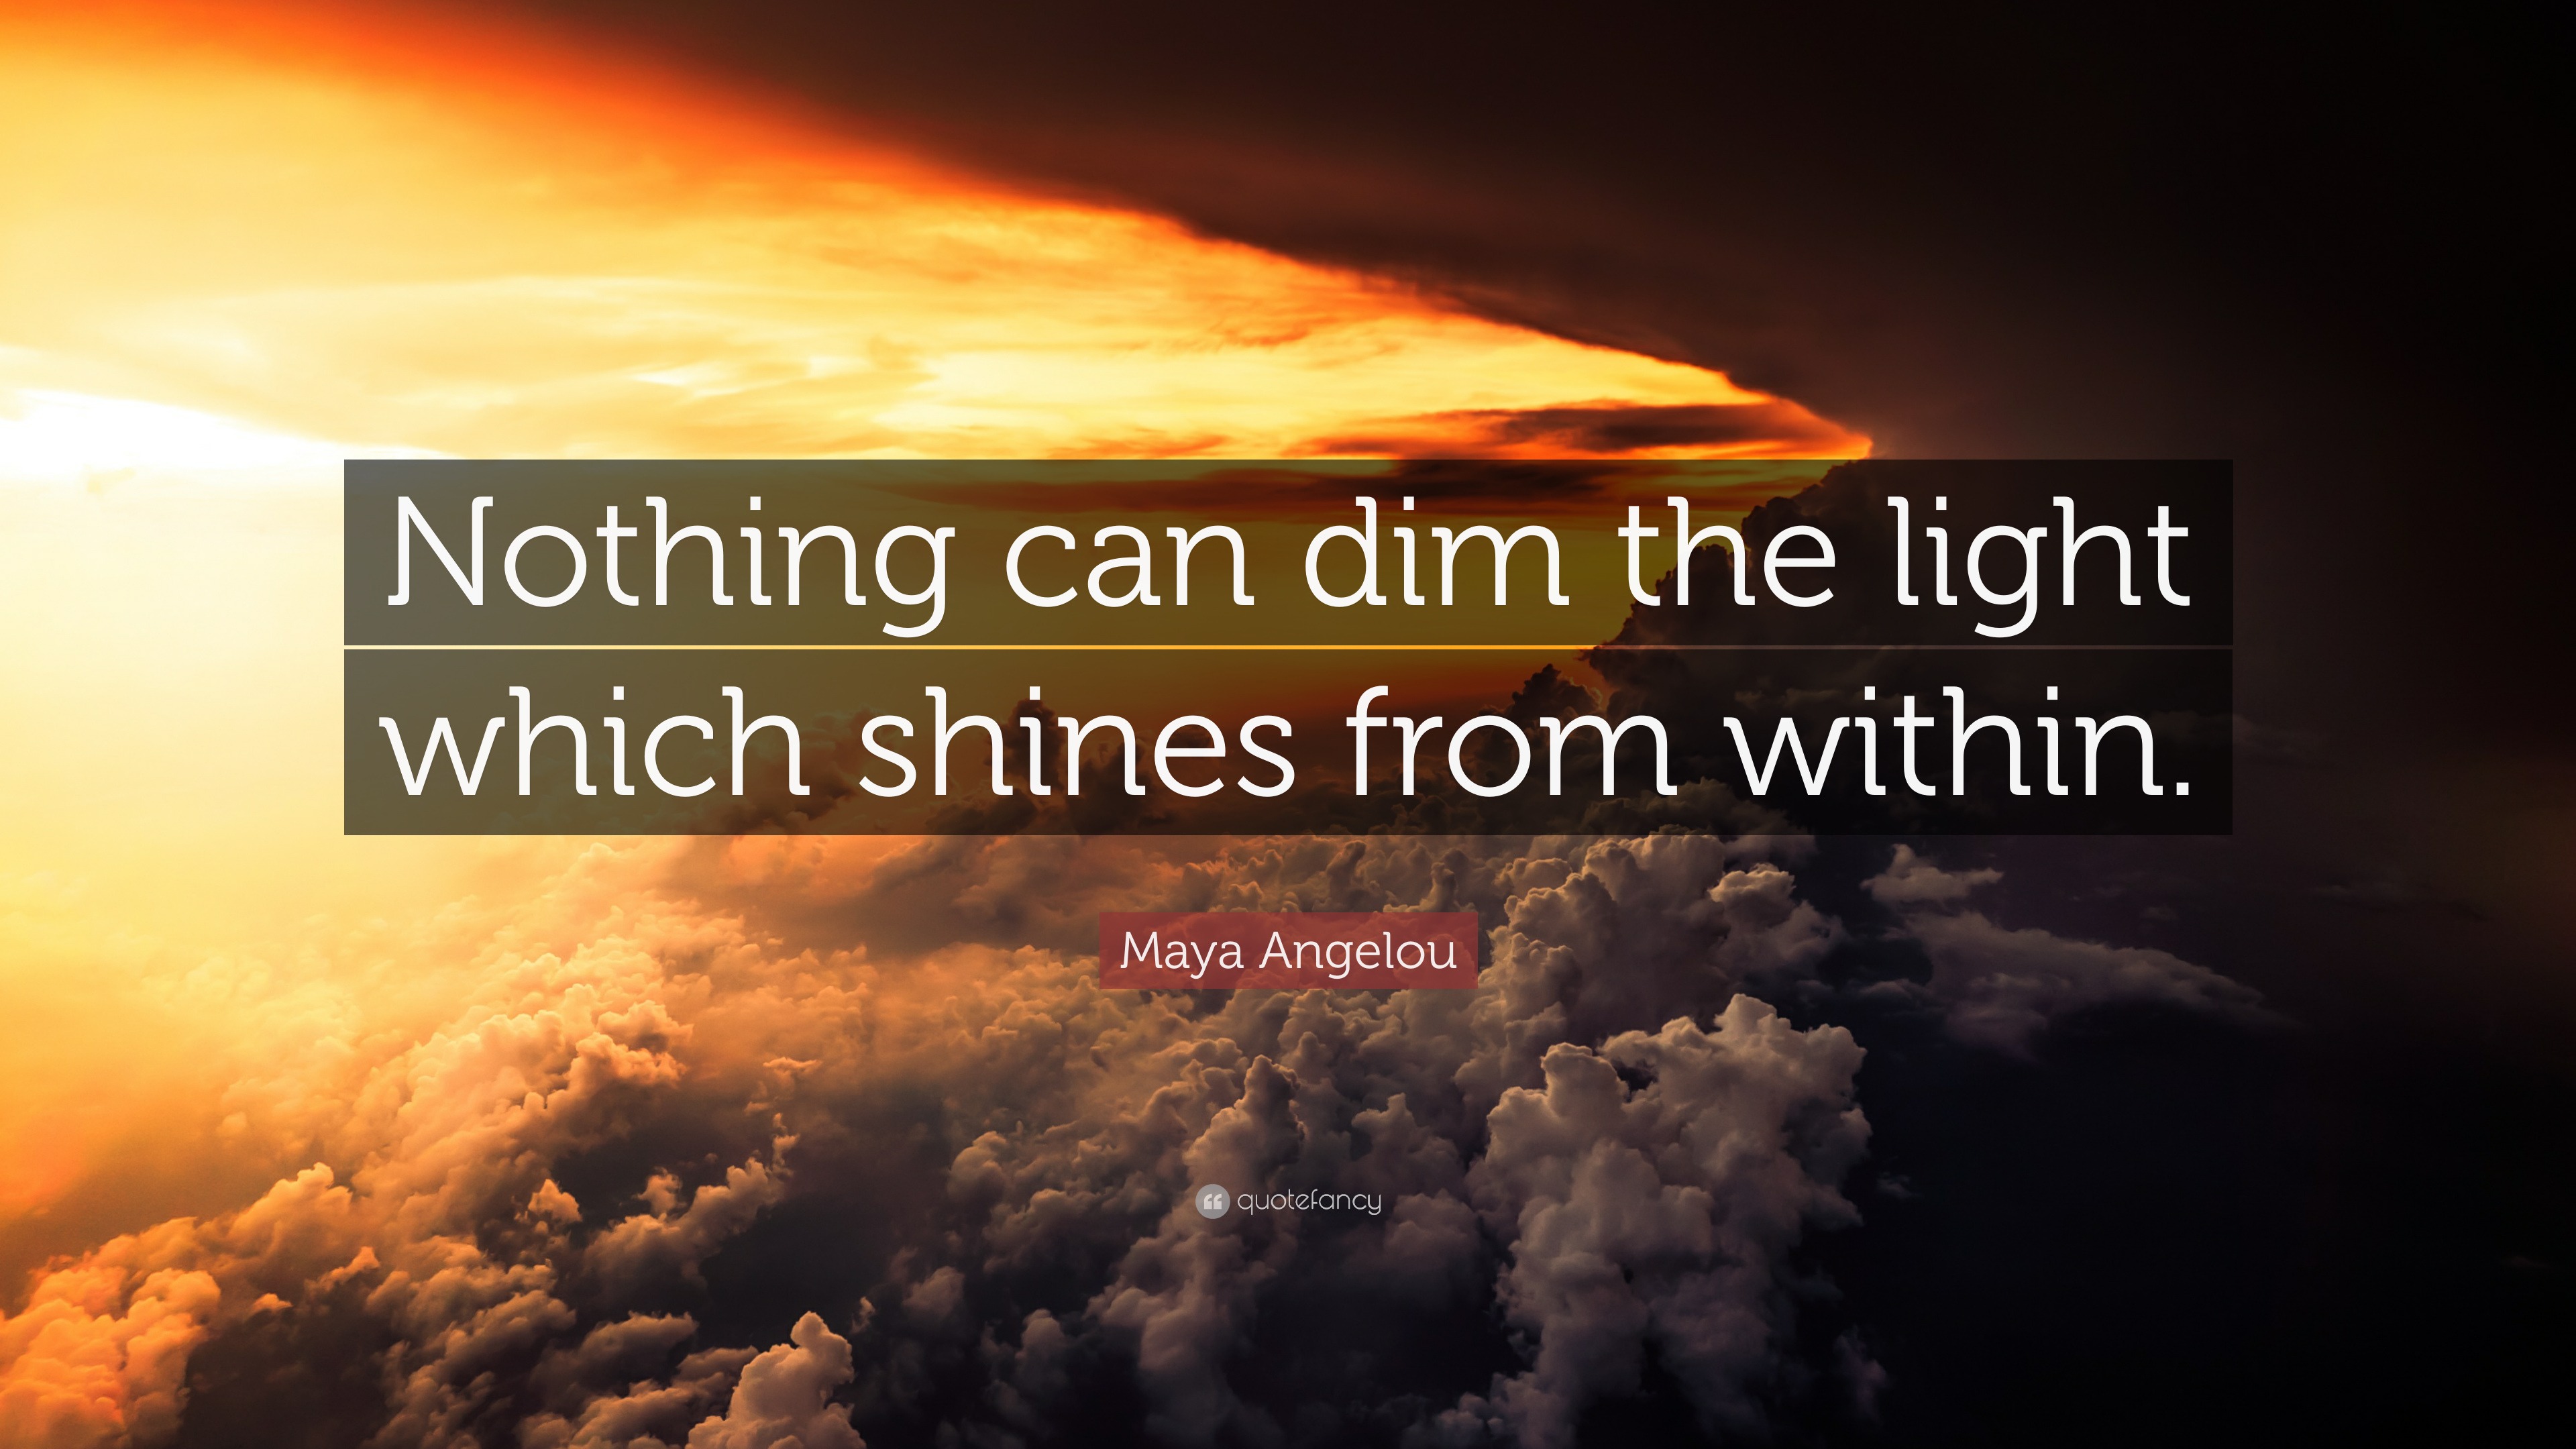 Maya Angelou Quote: “Nothing can dim the light which shines from within